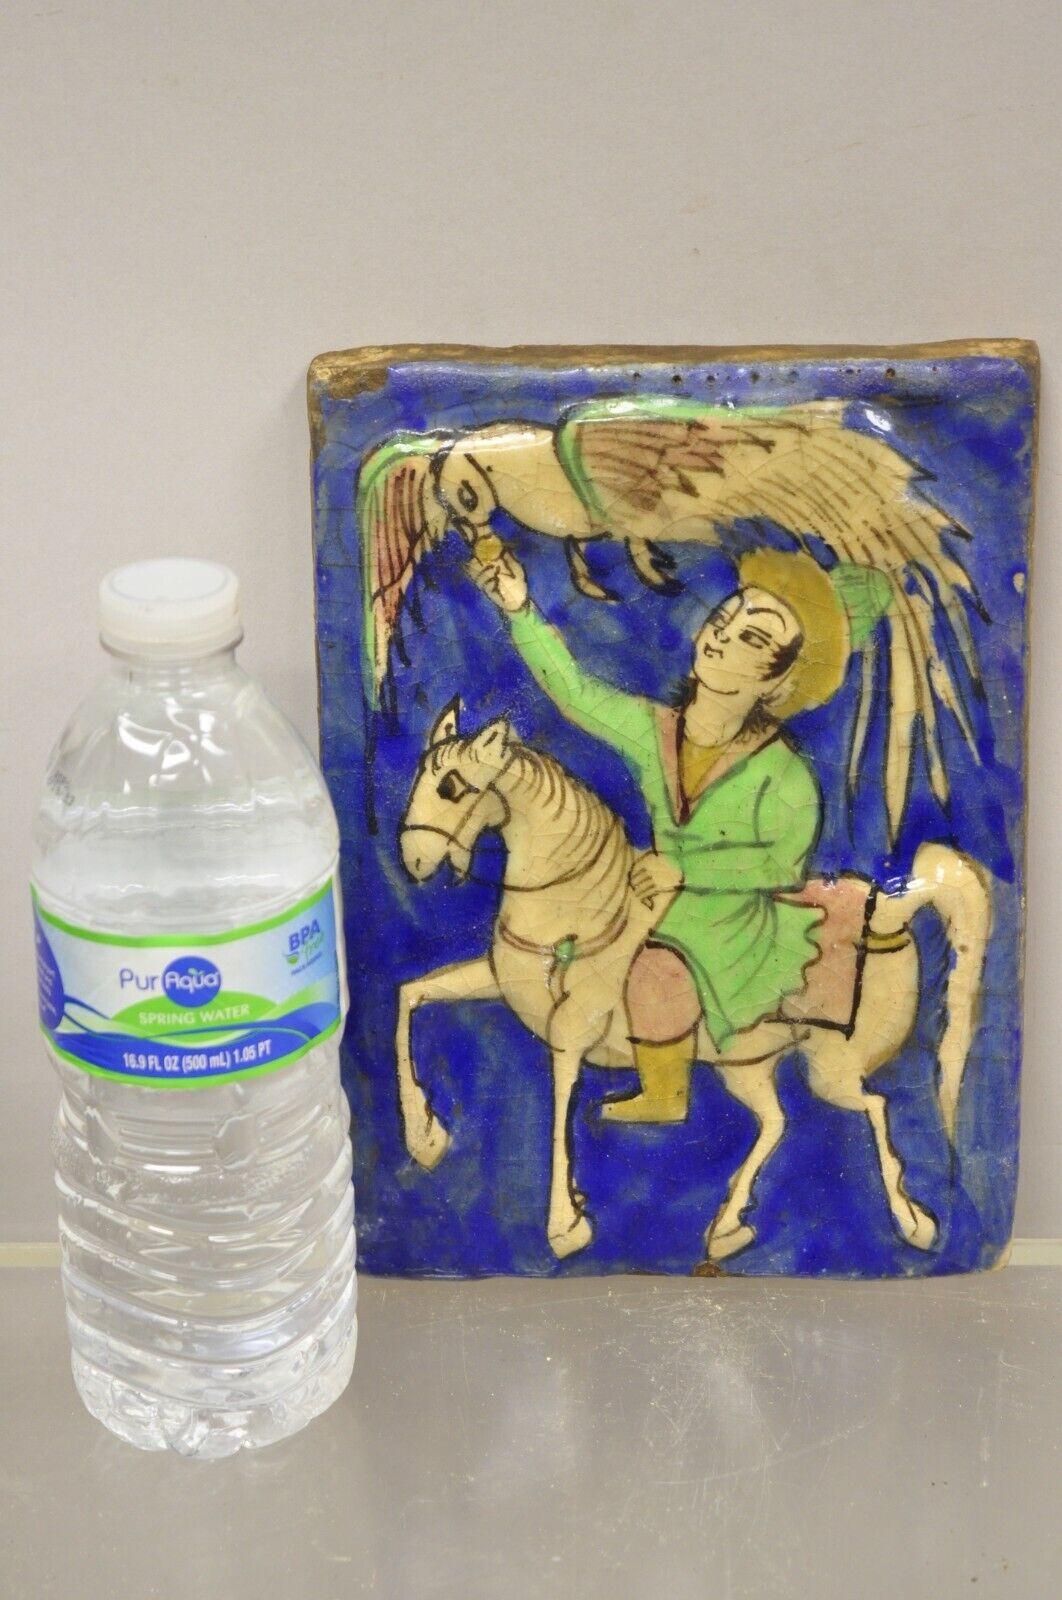 Antique Persian Iznik Qajar Style Blue Ceramic Pottery Tile Horse Rider with Green Garb and Phoenix Bird C4. Item features original crackle glazed finish, heavy ceramic pottery construction, very impressive detail, wonderful style and form. Great to